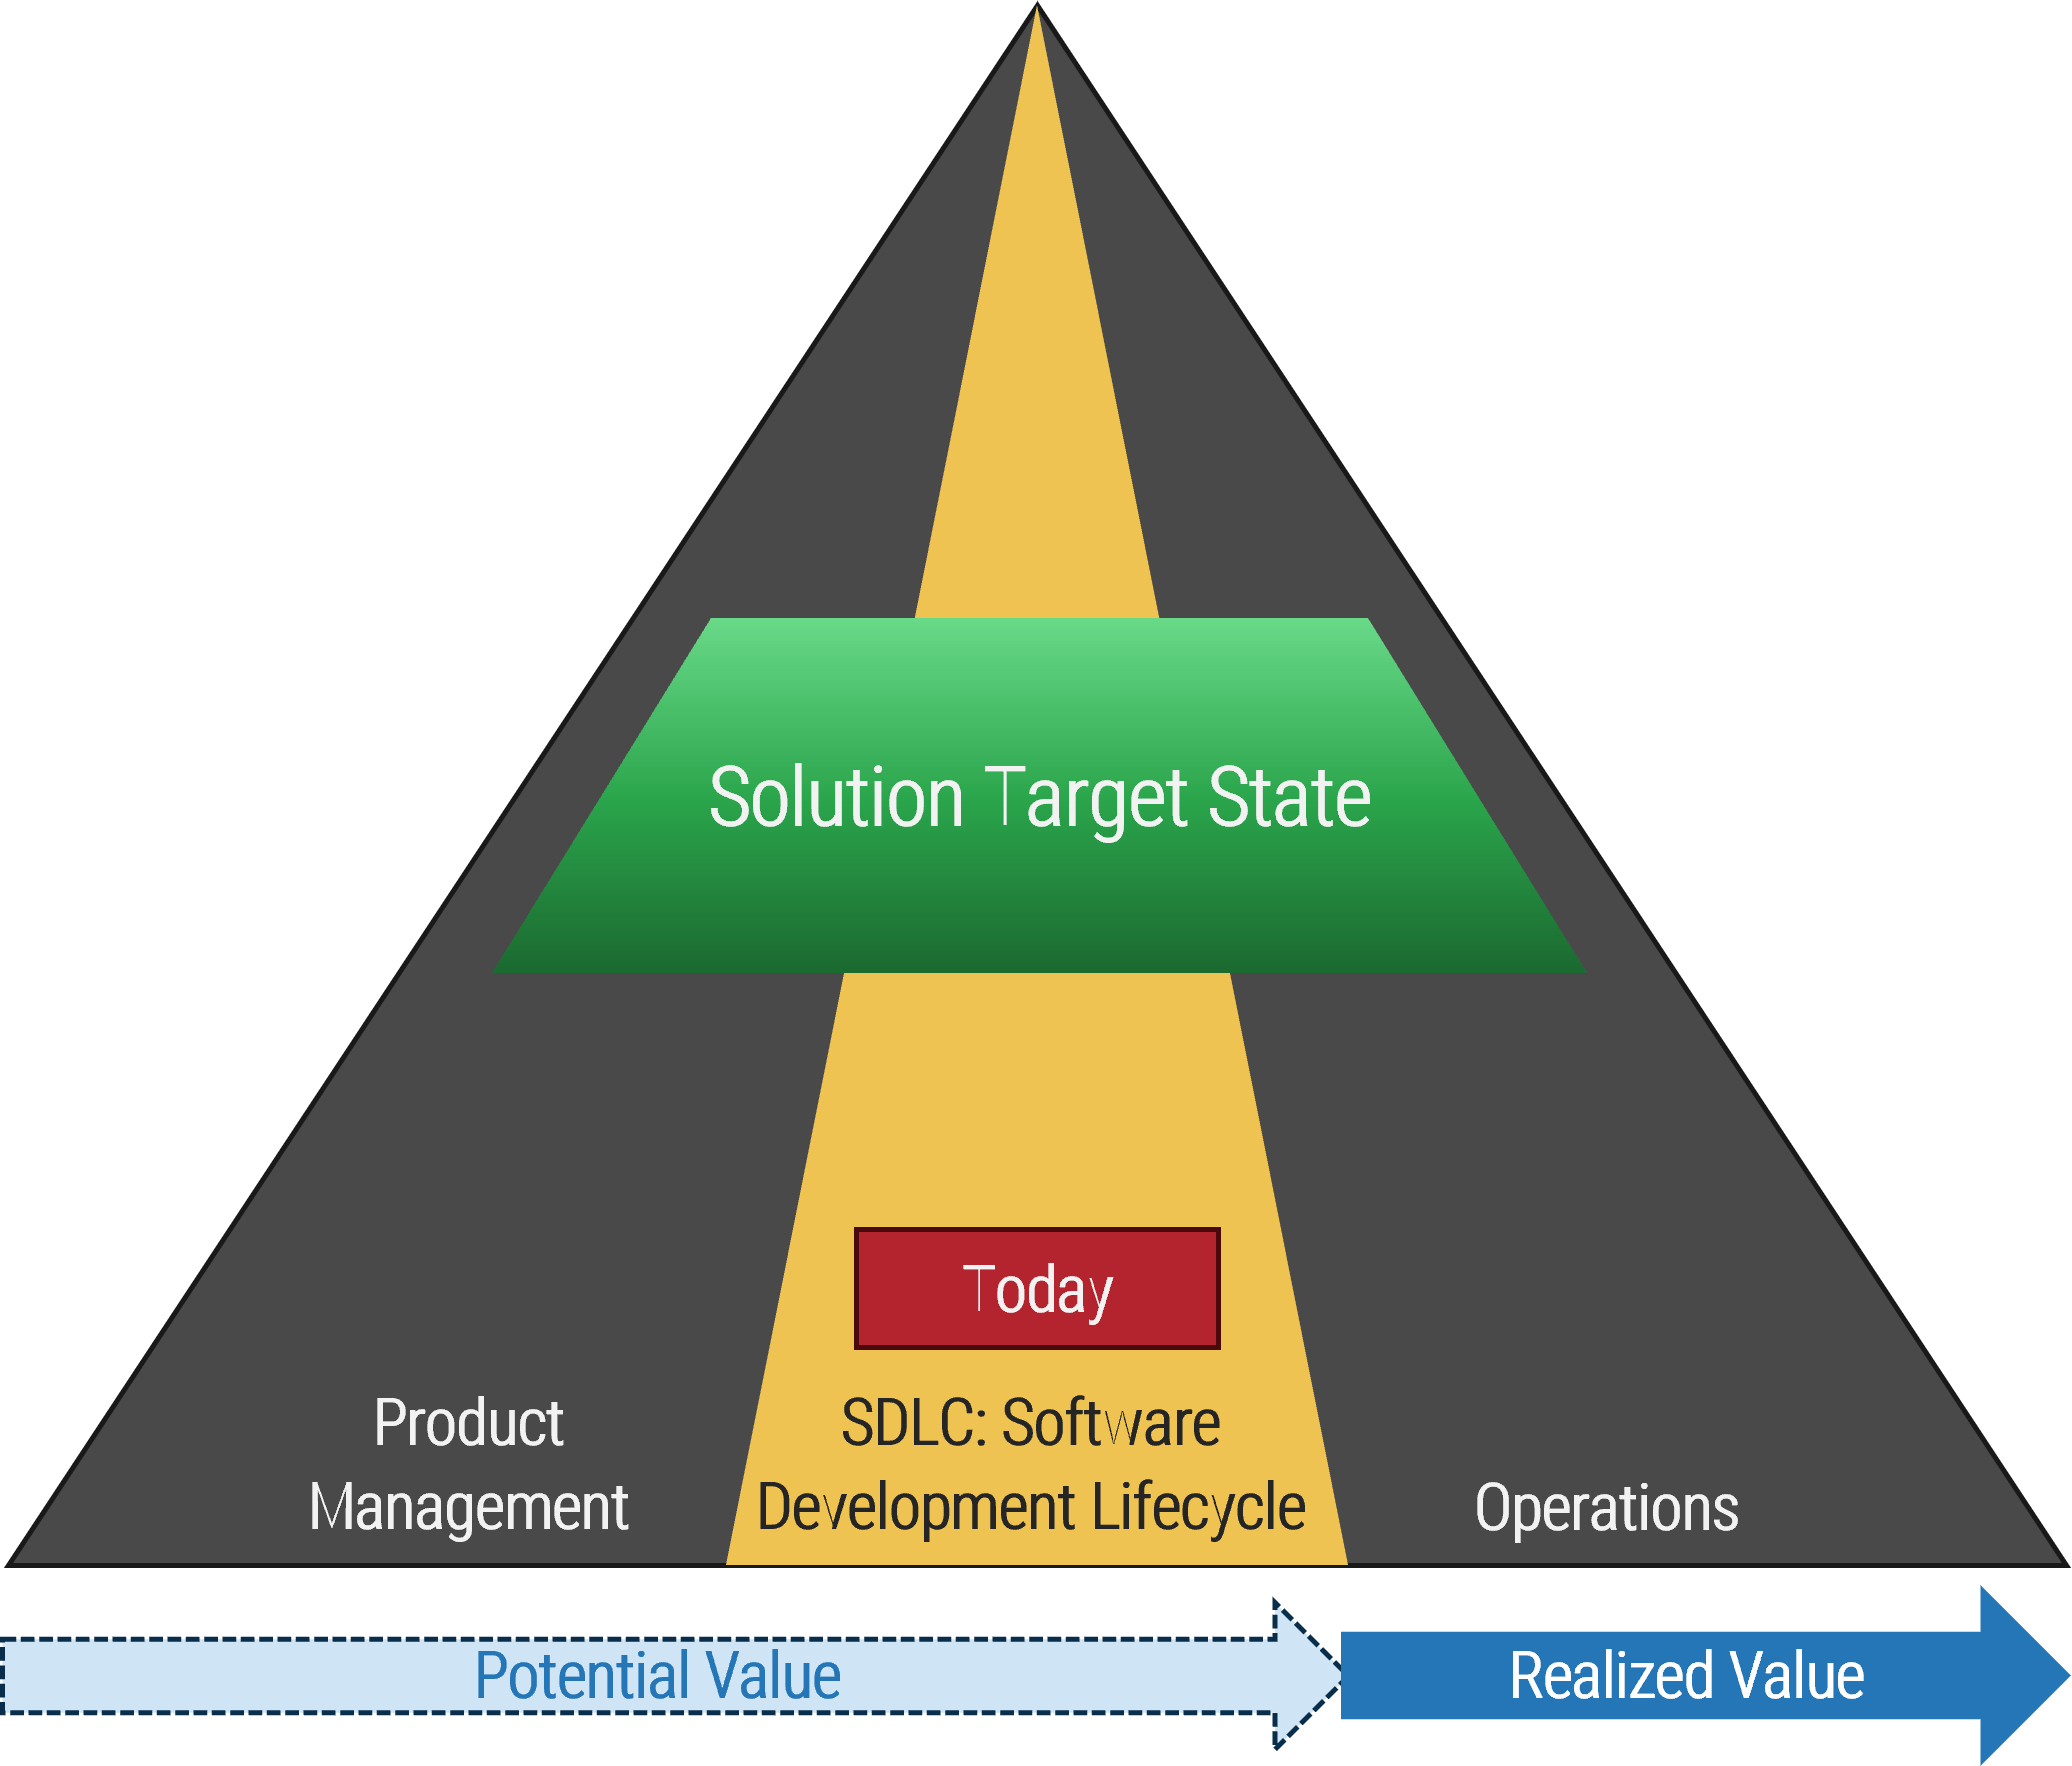 Visualization of a highway disappearing into the distance. There is a green bar across all lanes titled 'Solution Target State', the left lane is labelled 'Product Management', the dividing line is 'Today' and 'SDLC Software Development Lifecycle', and the right lane is 'Operations'. Underneath are too arrows pointing right: the first is under the left lane and dividing line 'Potential Value', and other is under the right lane 'Realized Value'.